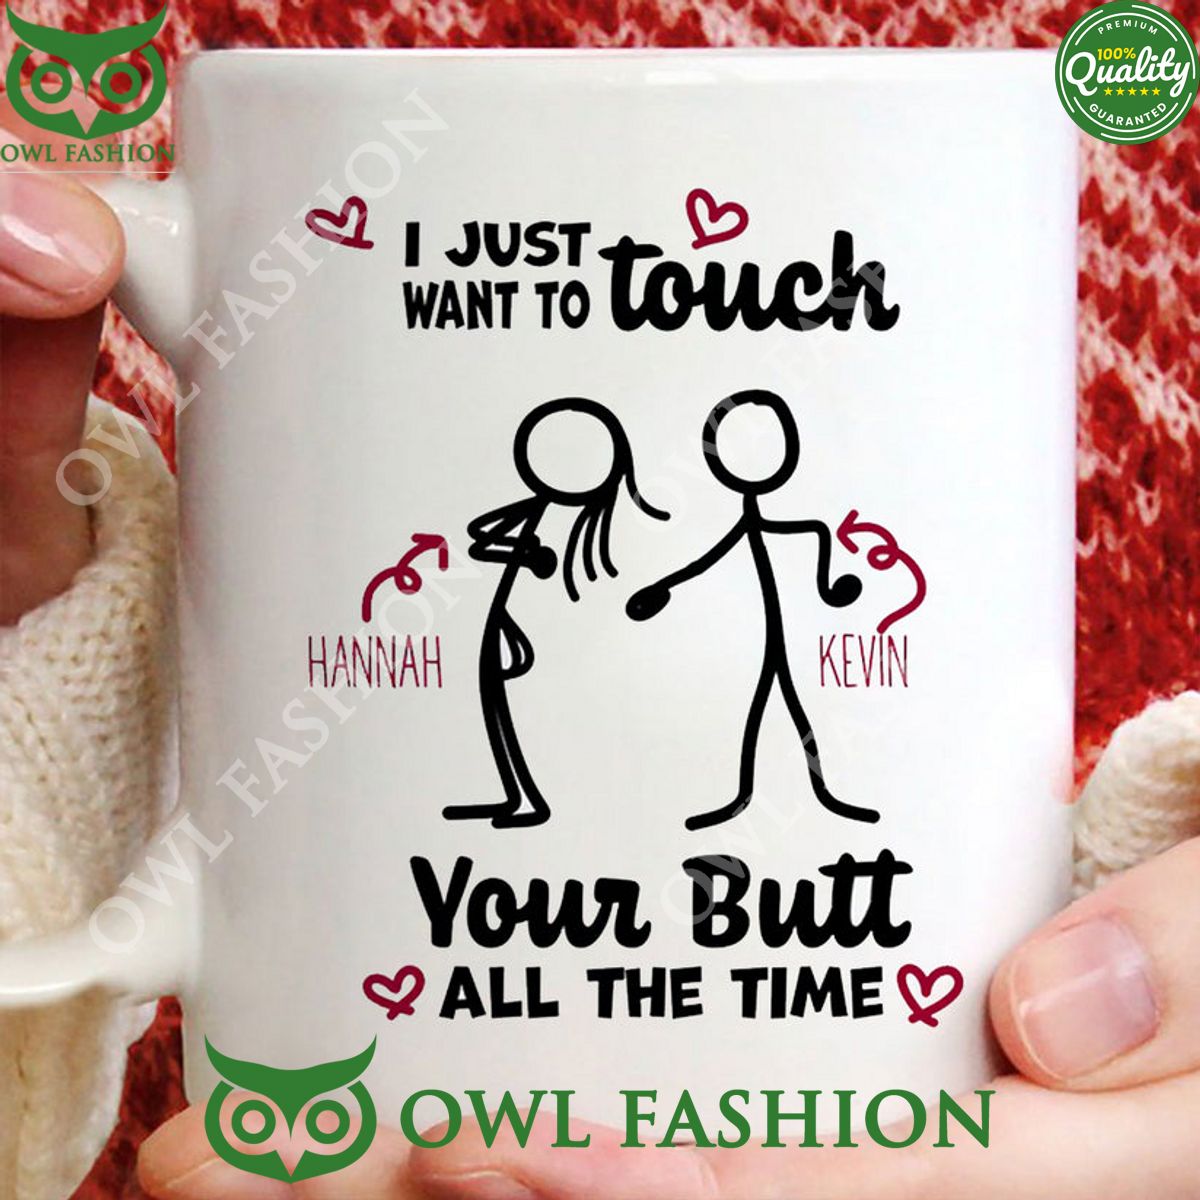 personalized i just want to touch your butt all the time mug custom couple mug funny gifts 1 NhqBg.jpg